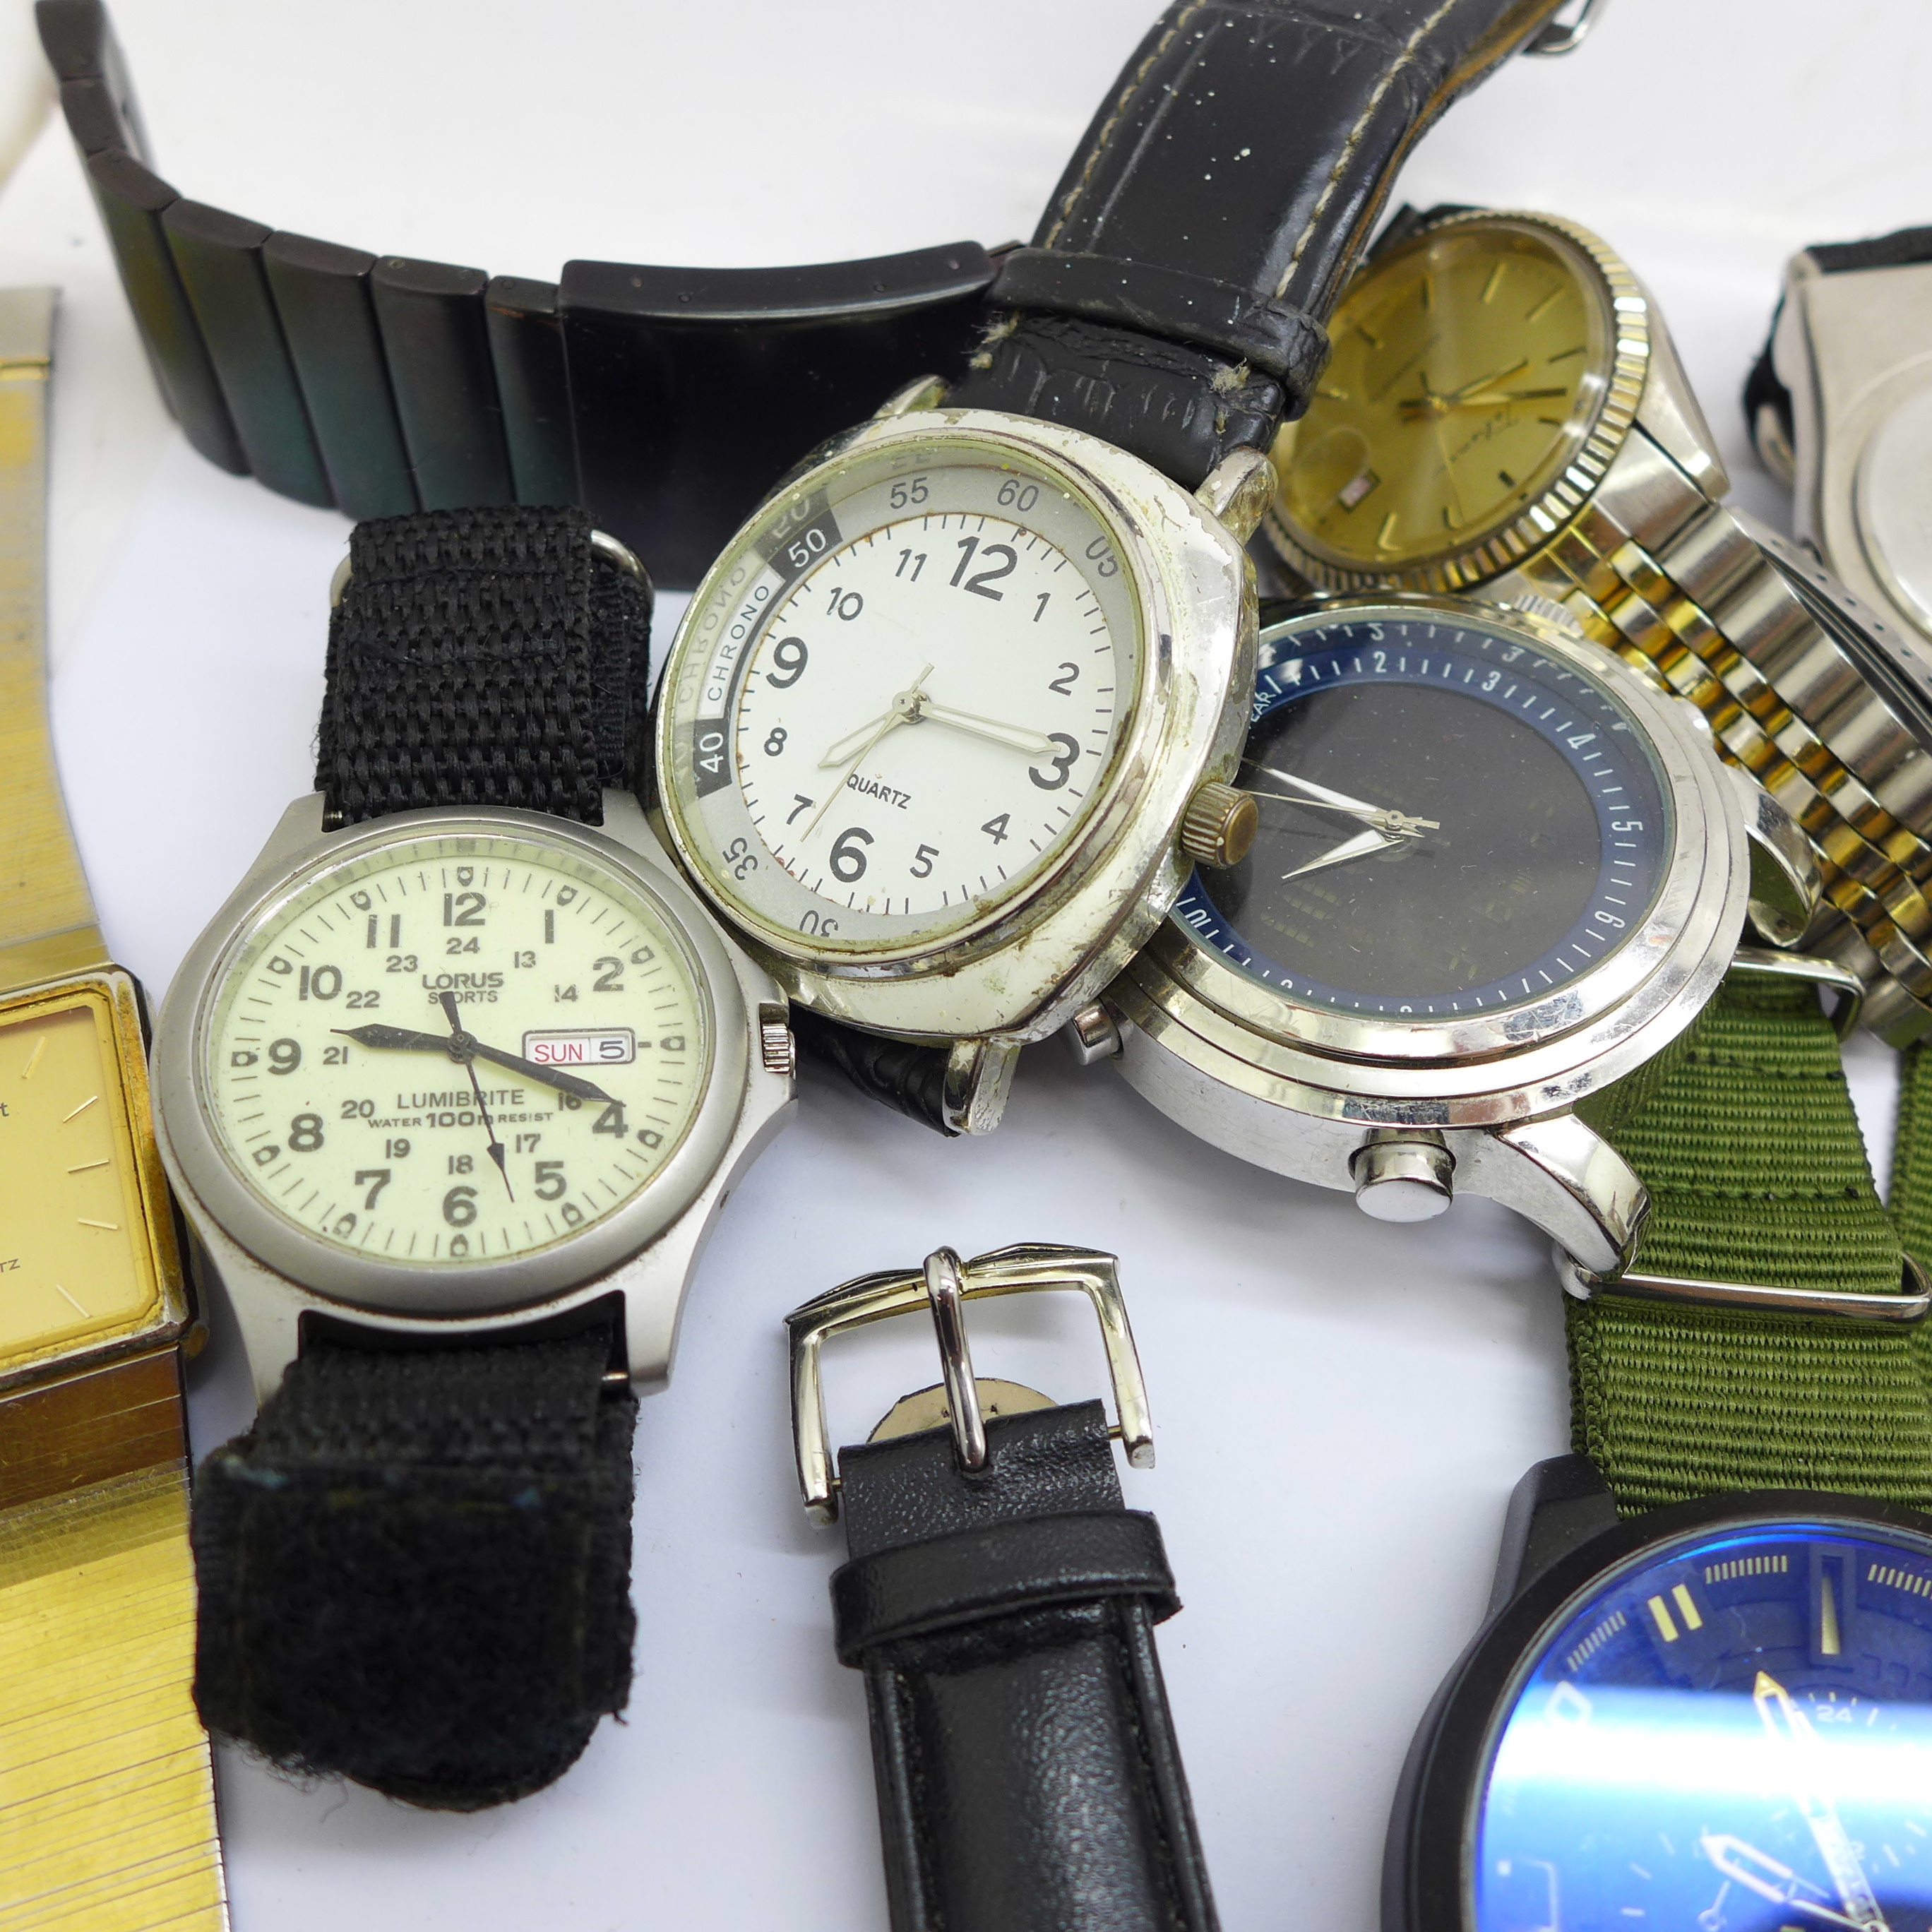 Wristwatches including Seiko and Accurist, watch glasses, etc. - Image 3 of 8